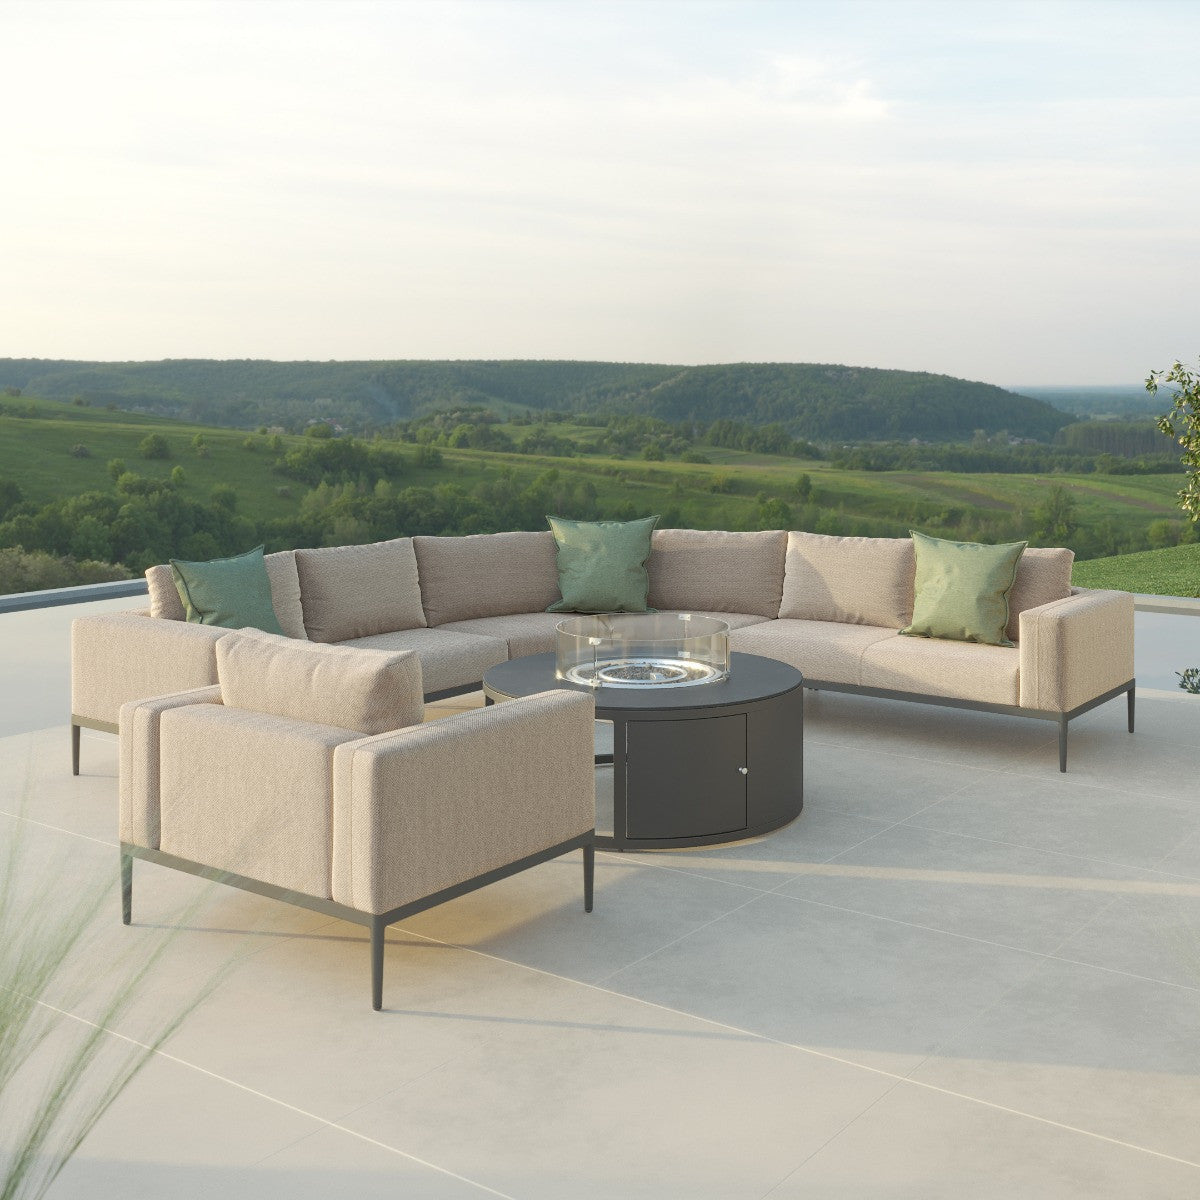 Maze Eve Grande Corner Sofa Group With Round Fire Pit Coffee Table Oatmeal With Chair-Better Bed Company